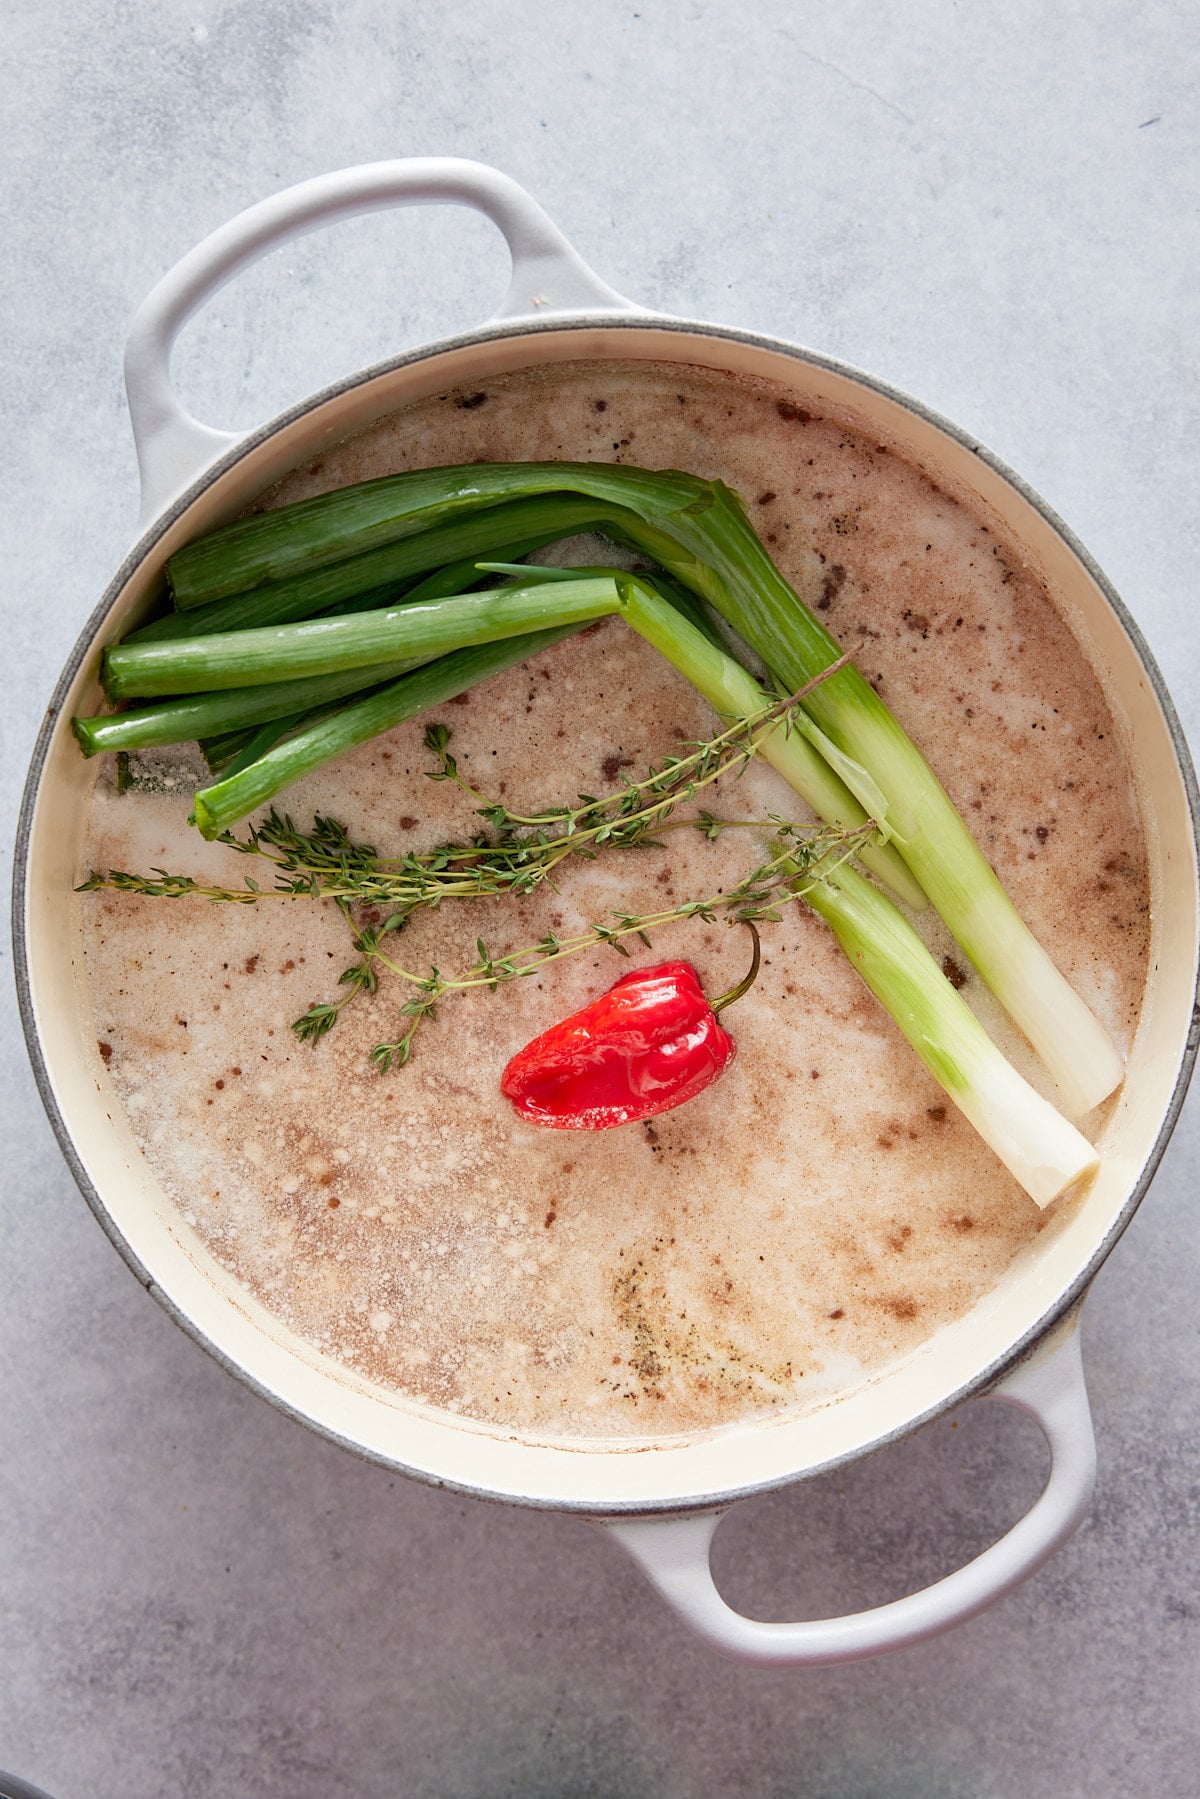 Dutch oven containing rice, stock, fresh green onions, sprigs or thyme and a Scotch bonnet